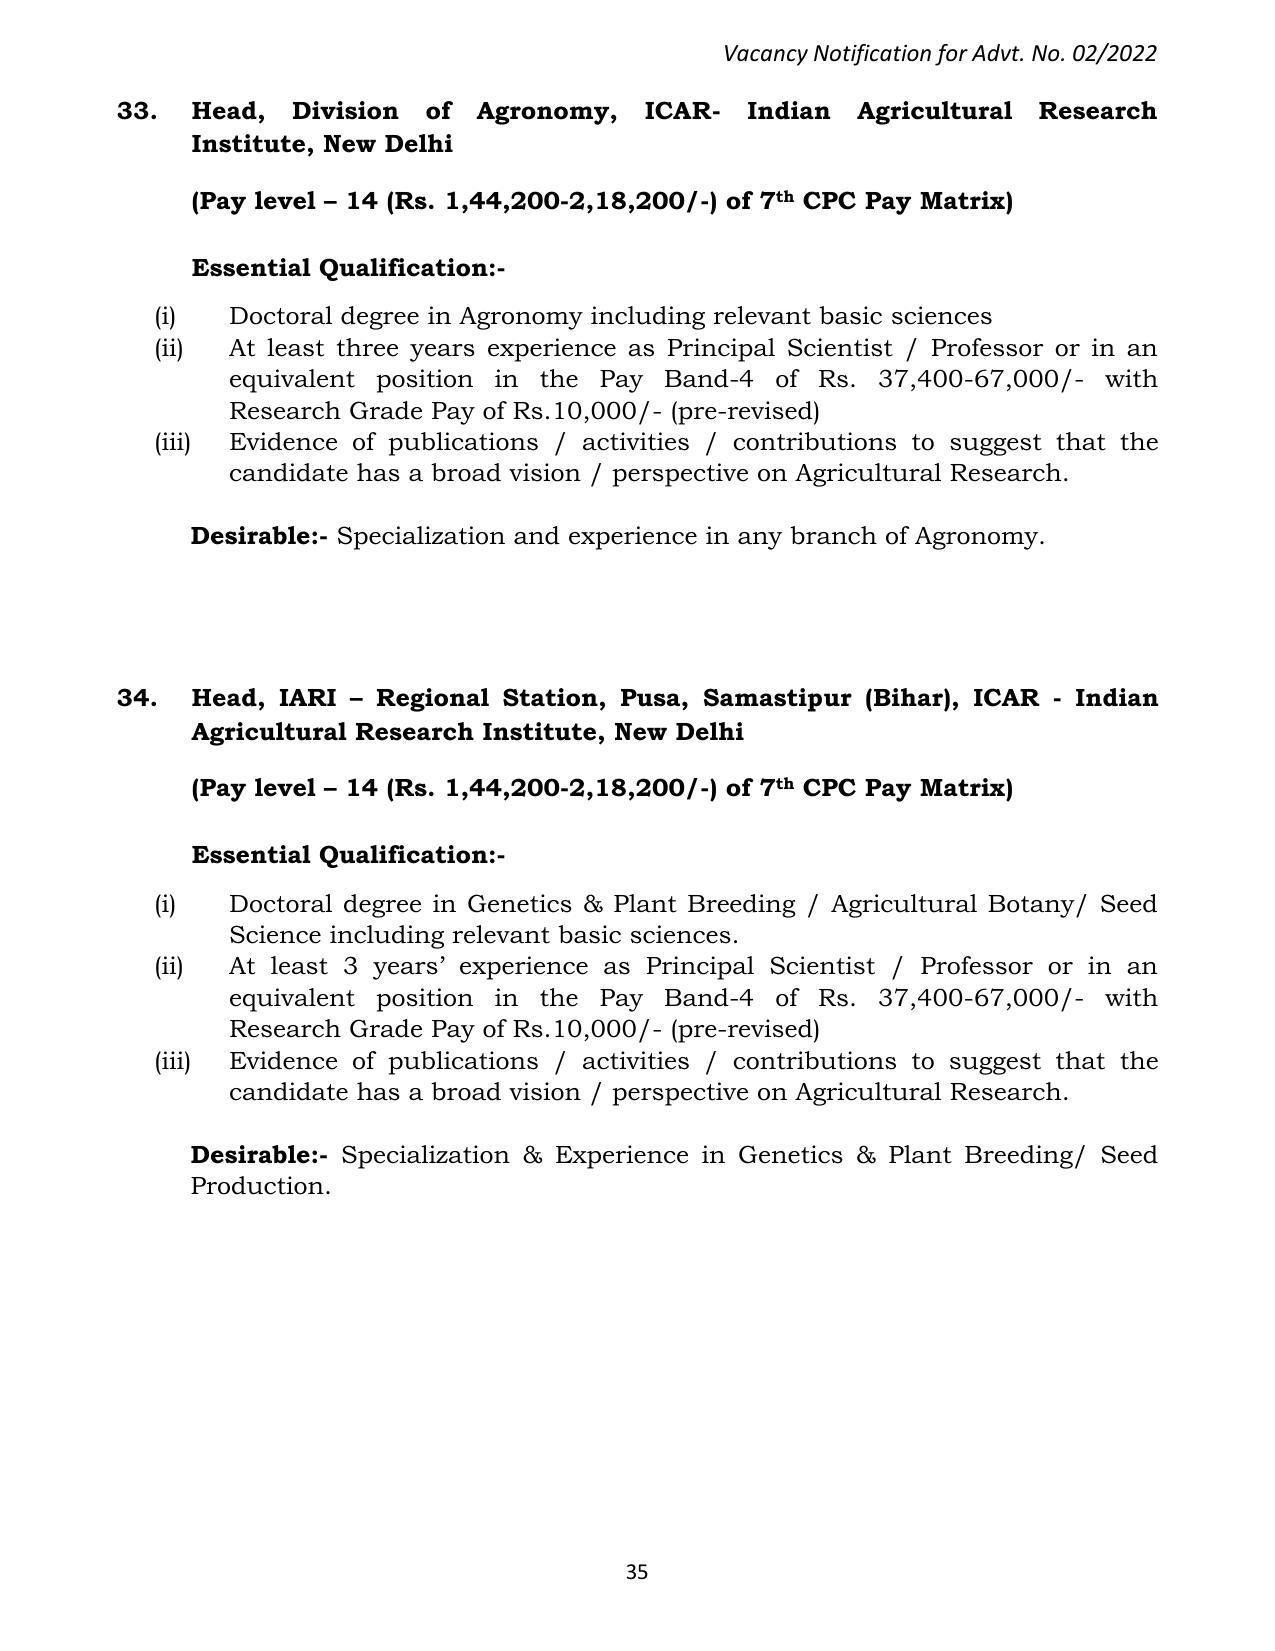 ASRB Non-Research Management Recruitment 2022 - Page 87